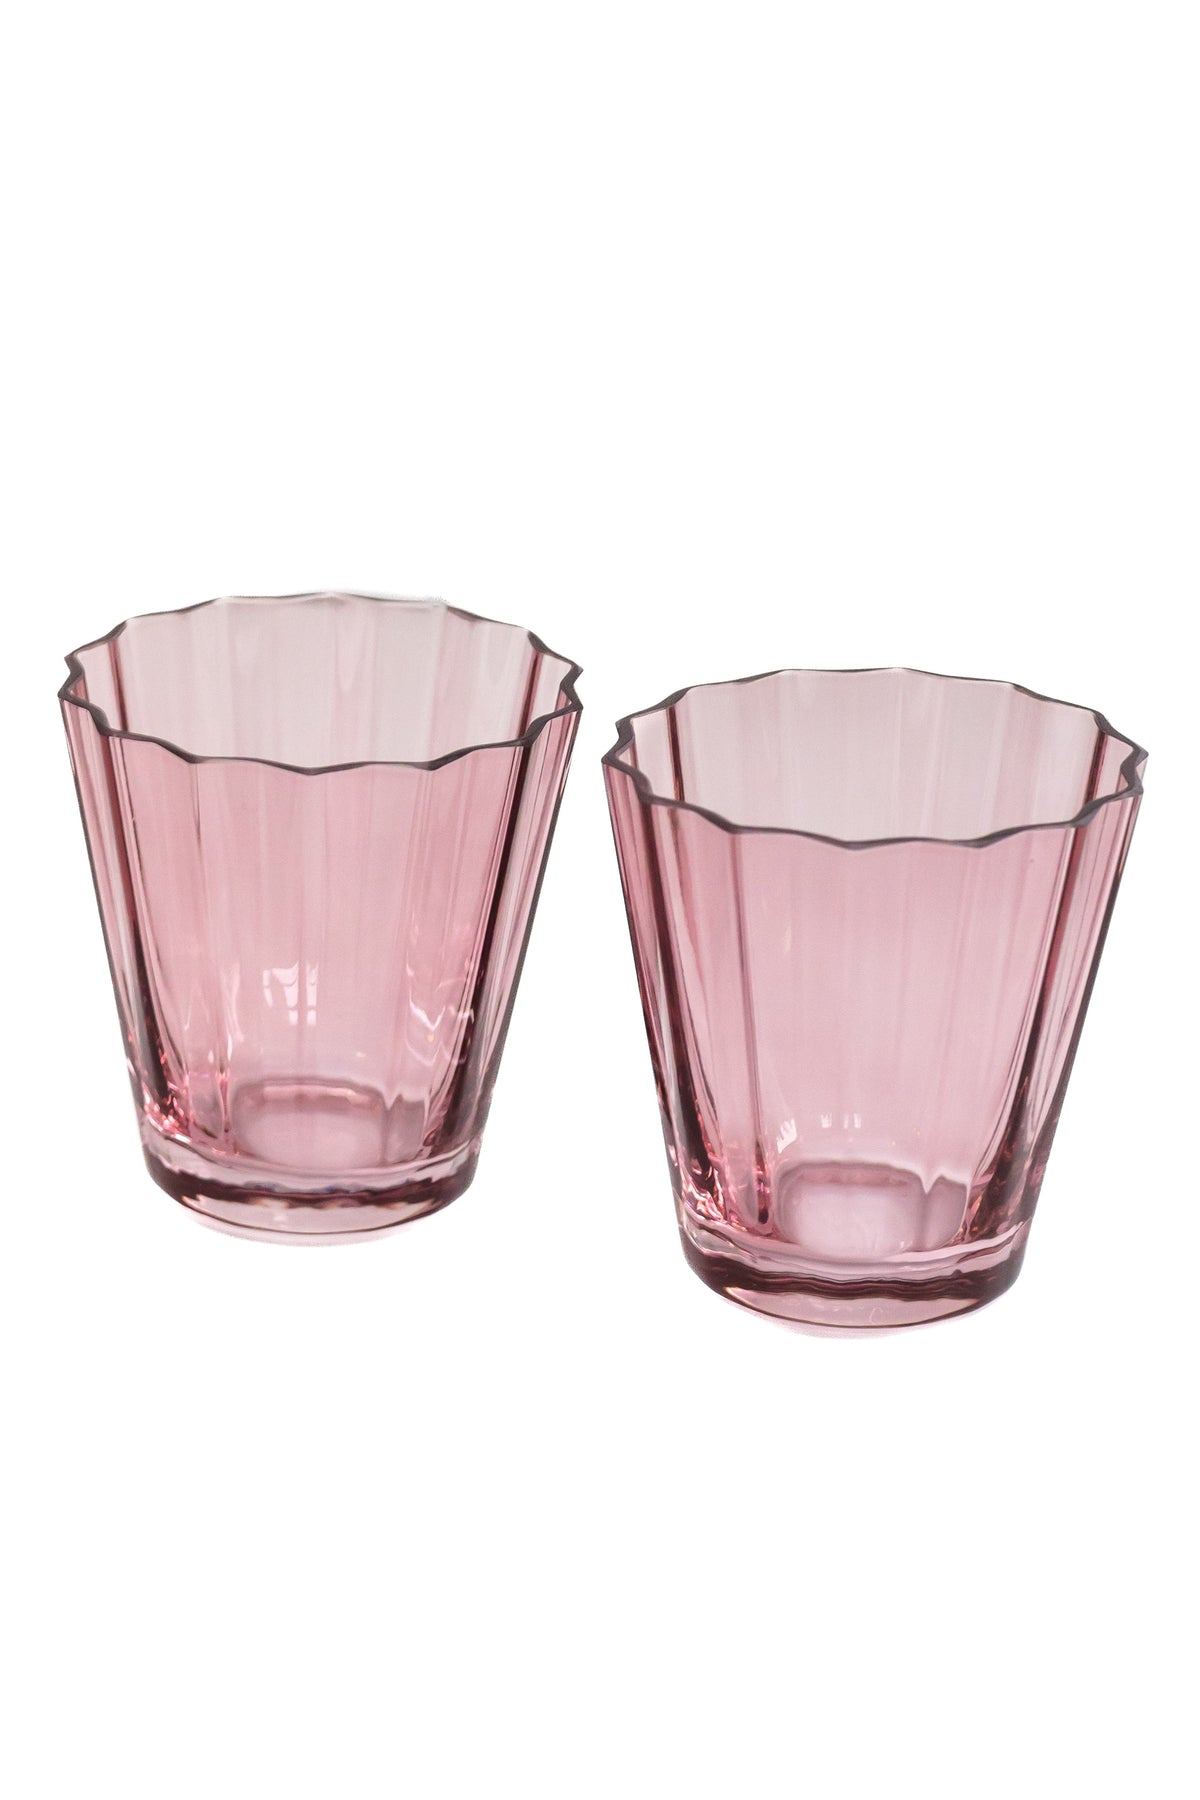 Estelle Colored Sunday Low Balls, Set of 2 in Rose